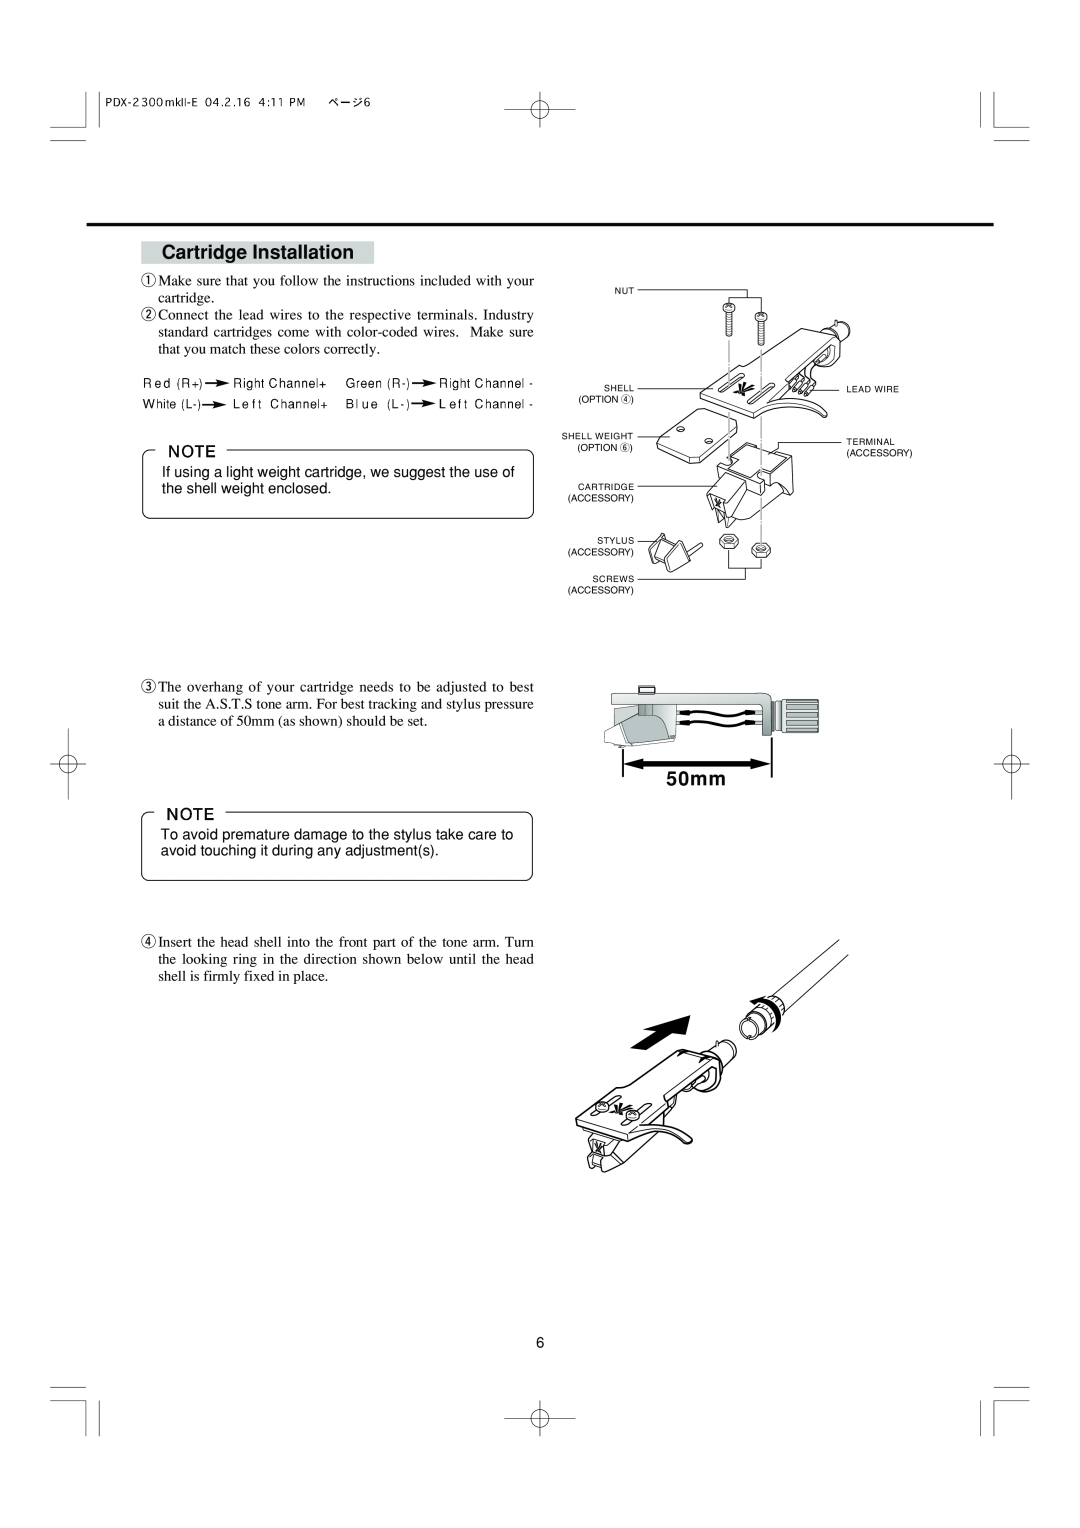 Vestax PDX-2300MkII, PDX-2300MkII Pro owner manual Cartridge Installation, 50mm 